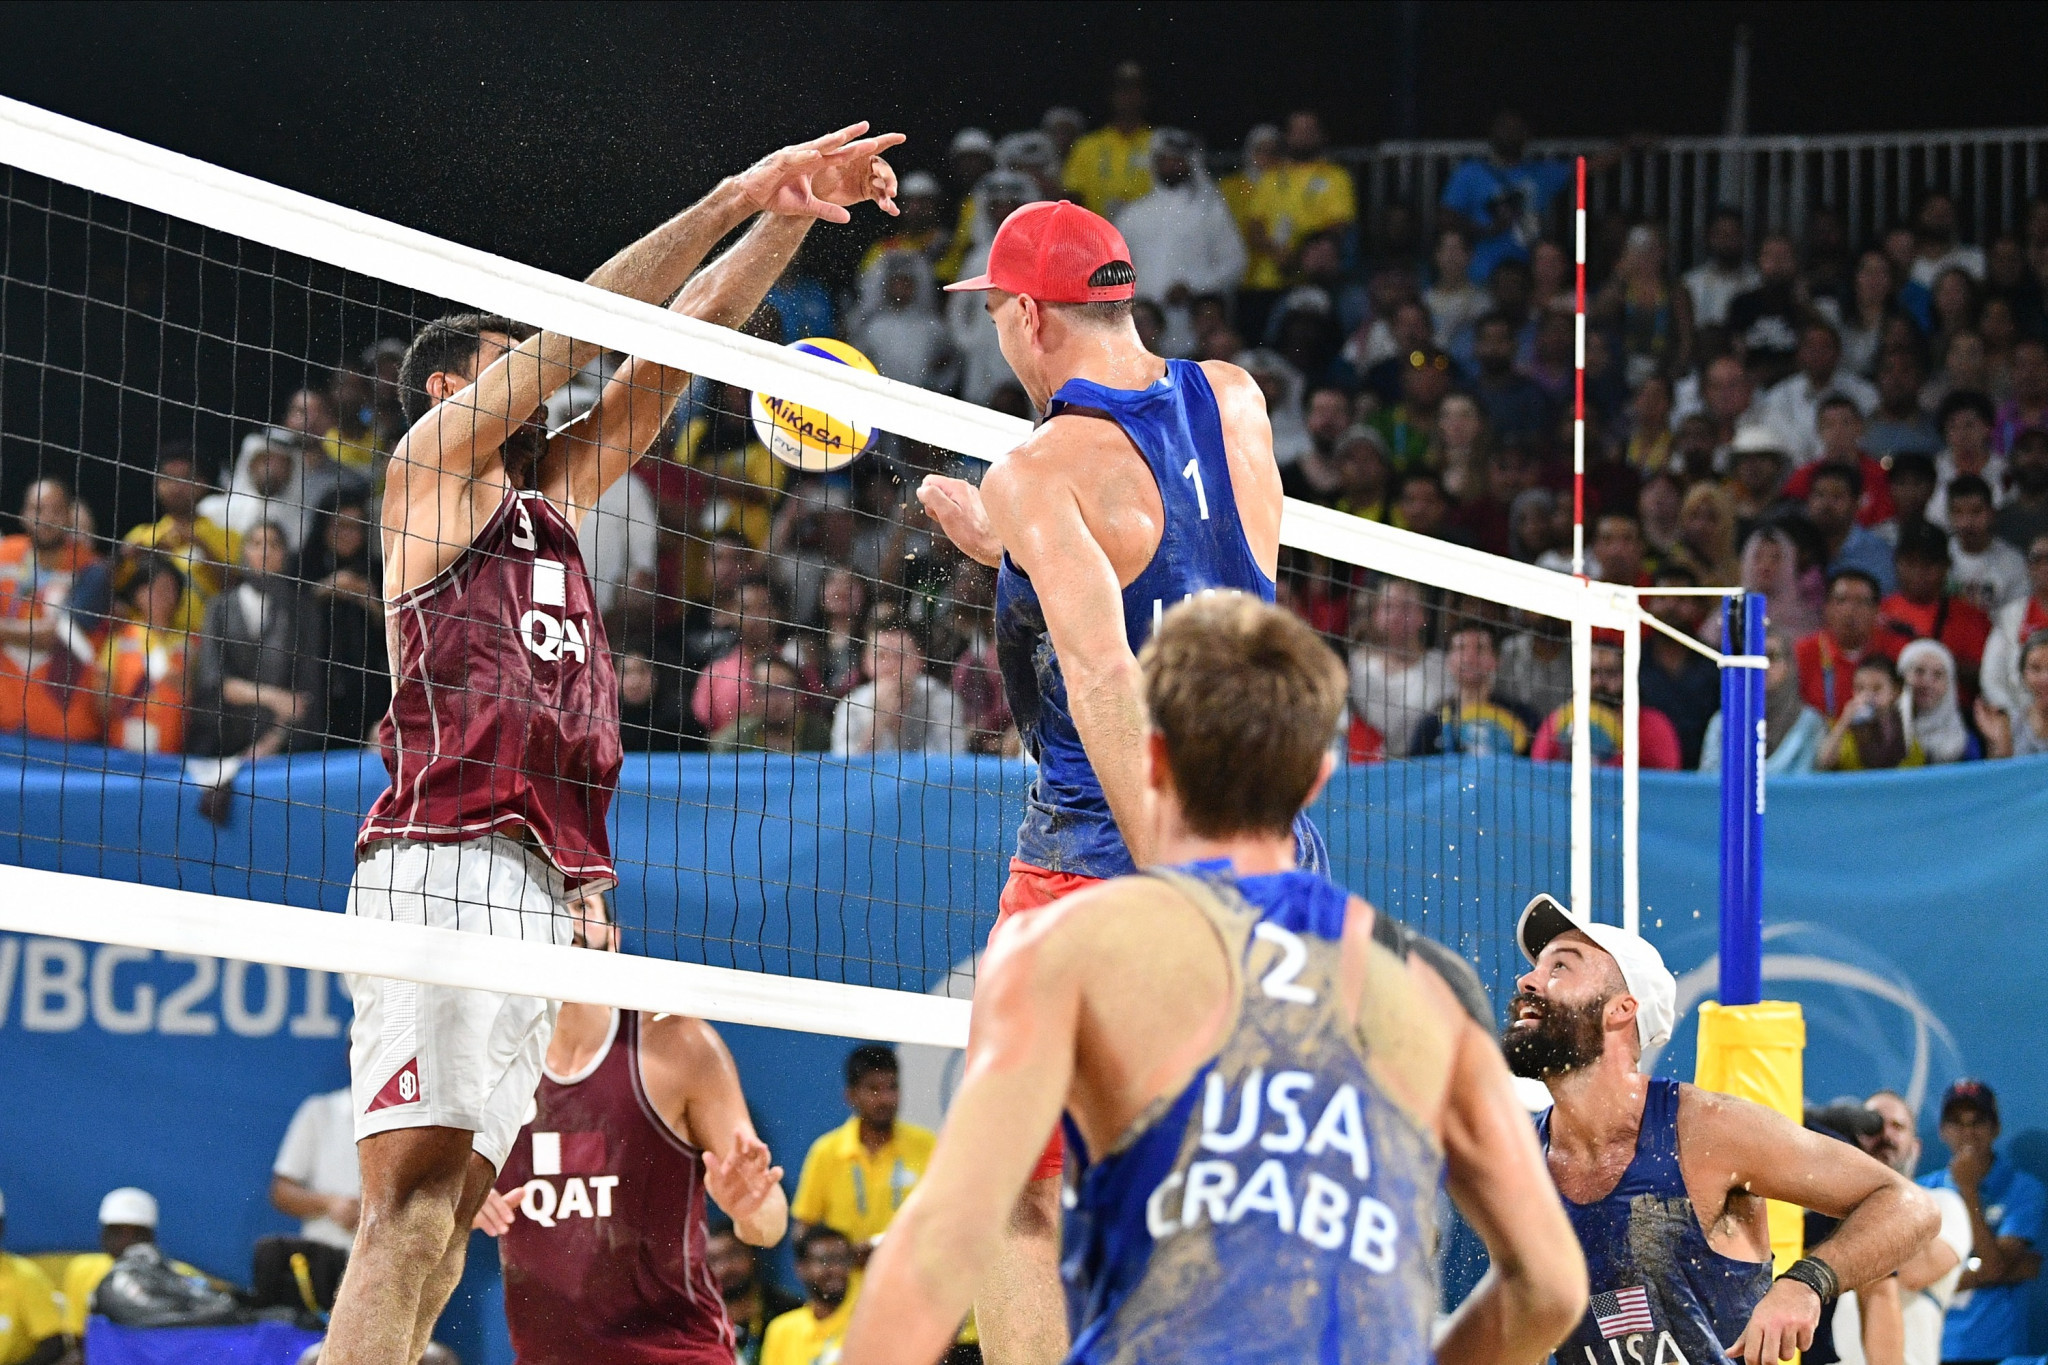 United States beat hosts Qatar to win the men's beach volleyball title ©ANOC